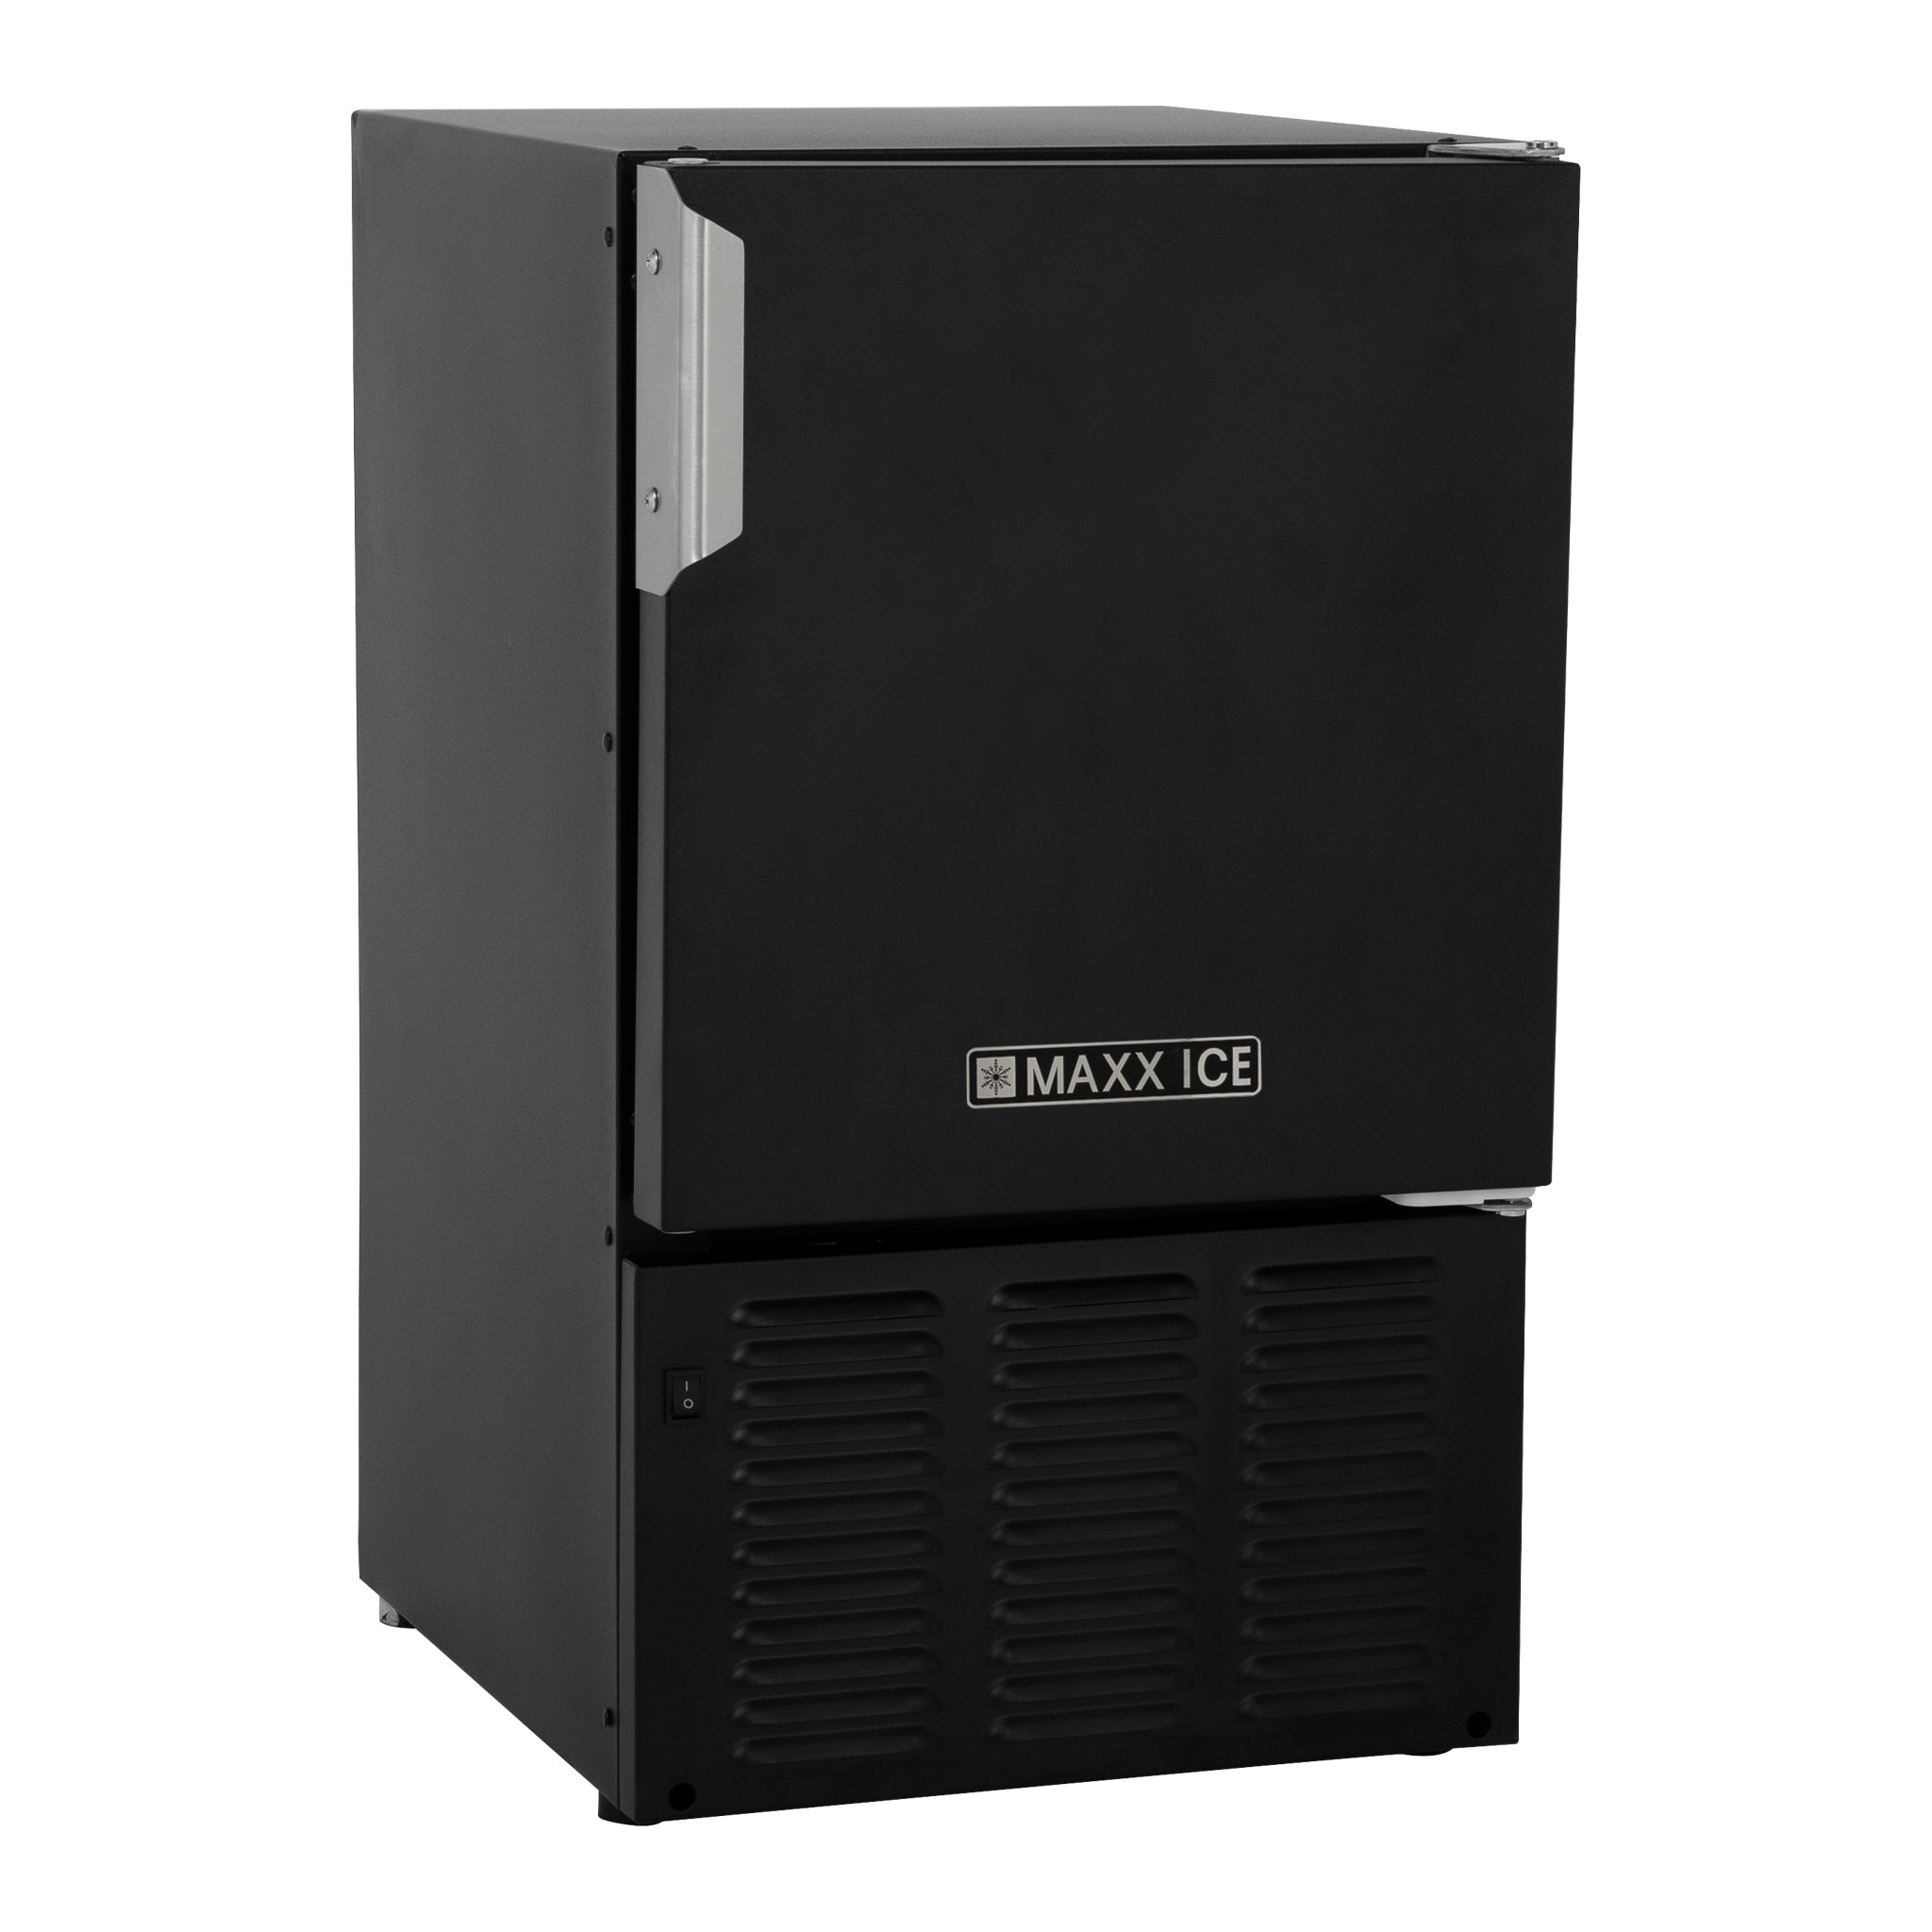 Maxx Ice - MMAR25B, Maxx Ice Compact Marine Ice Machine/Boat and RV Ice Maker, 25 lbs, Long Crescent Cubes, in Black